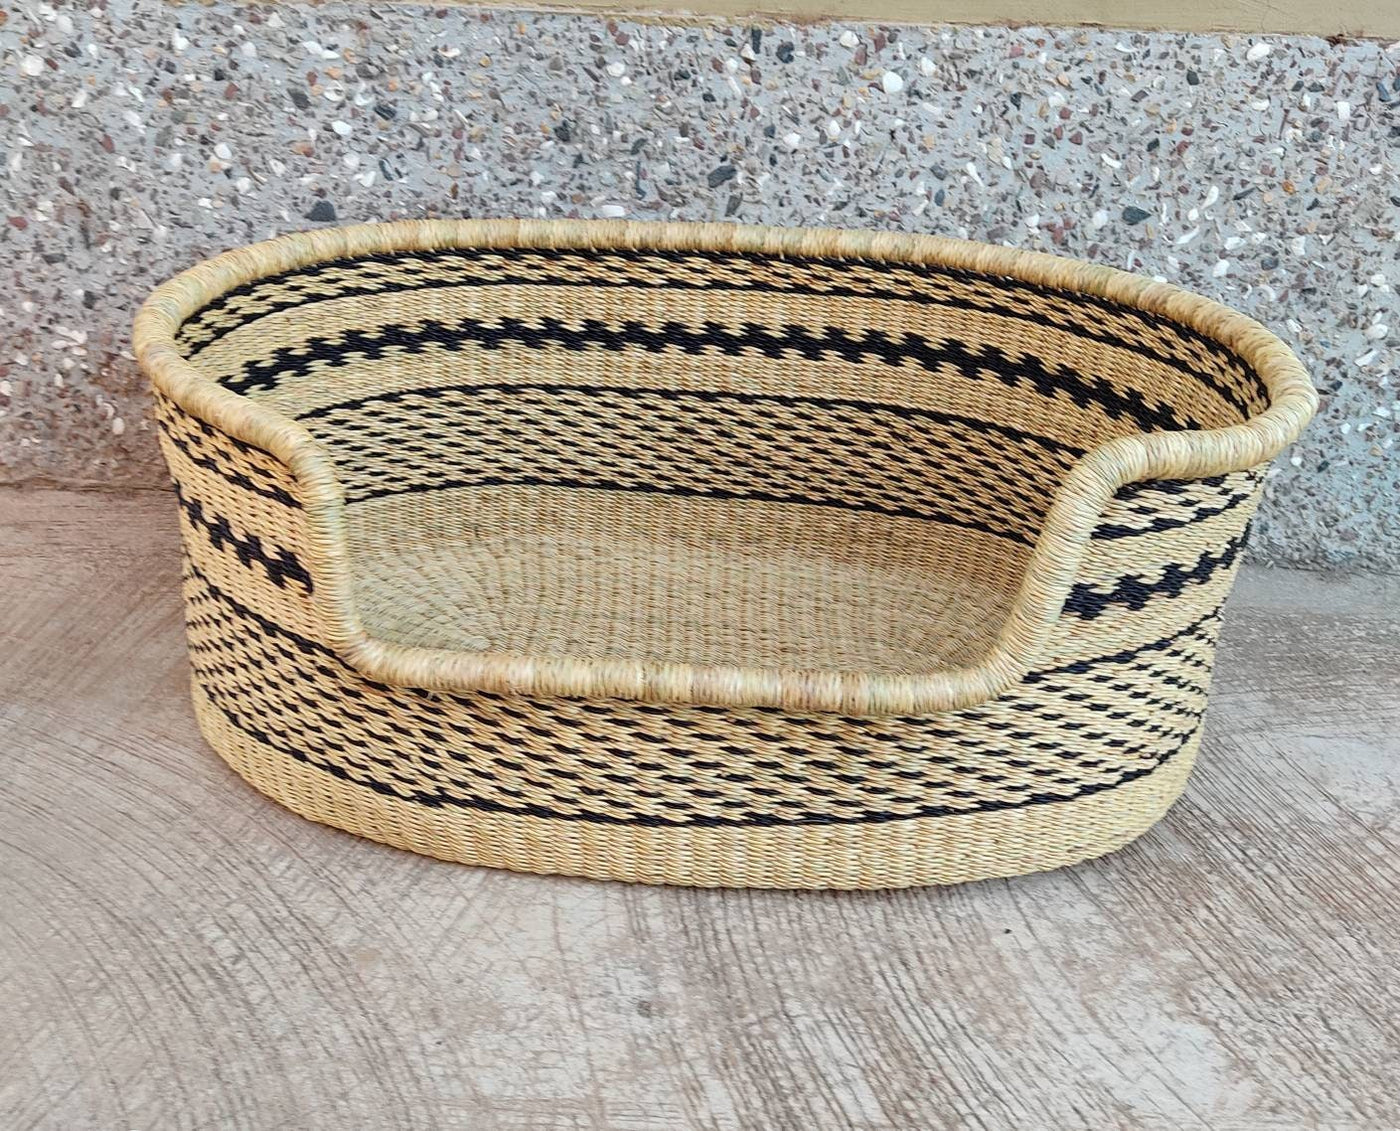 Dog Bed Furniture | Dog Basket | Personalized Dog Bed | Puppy Bed - AfricanheritageGH